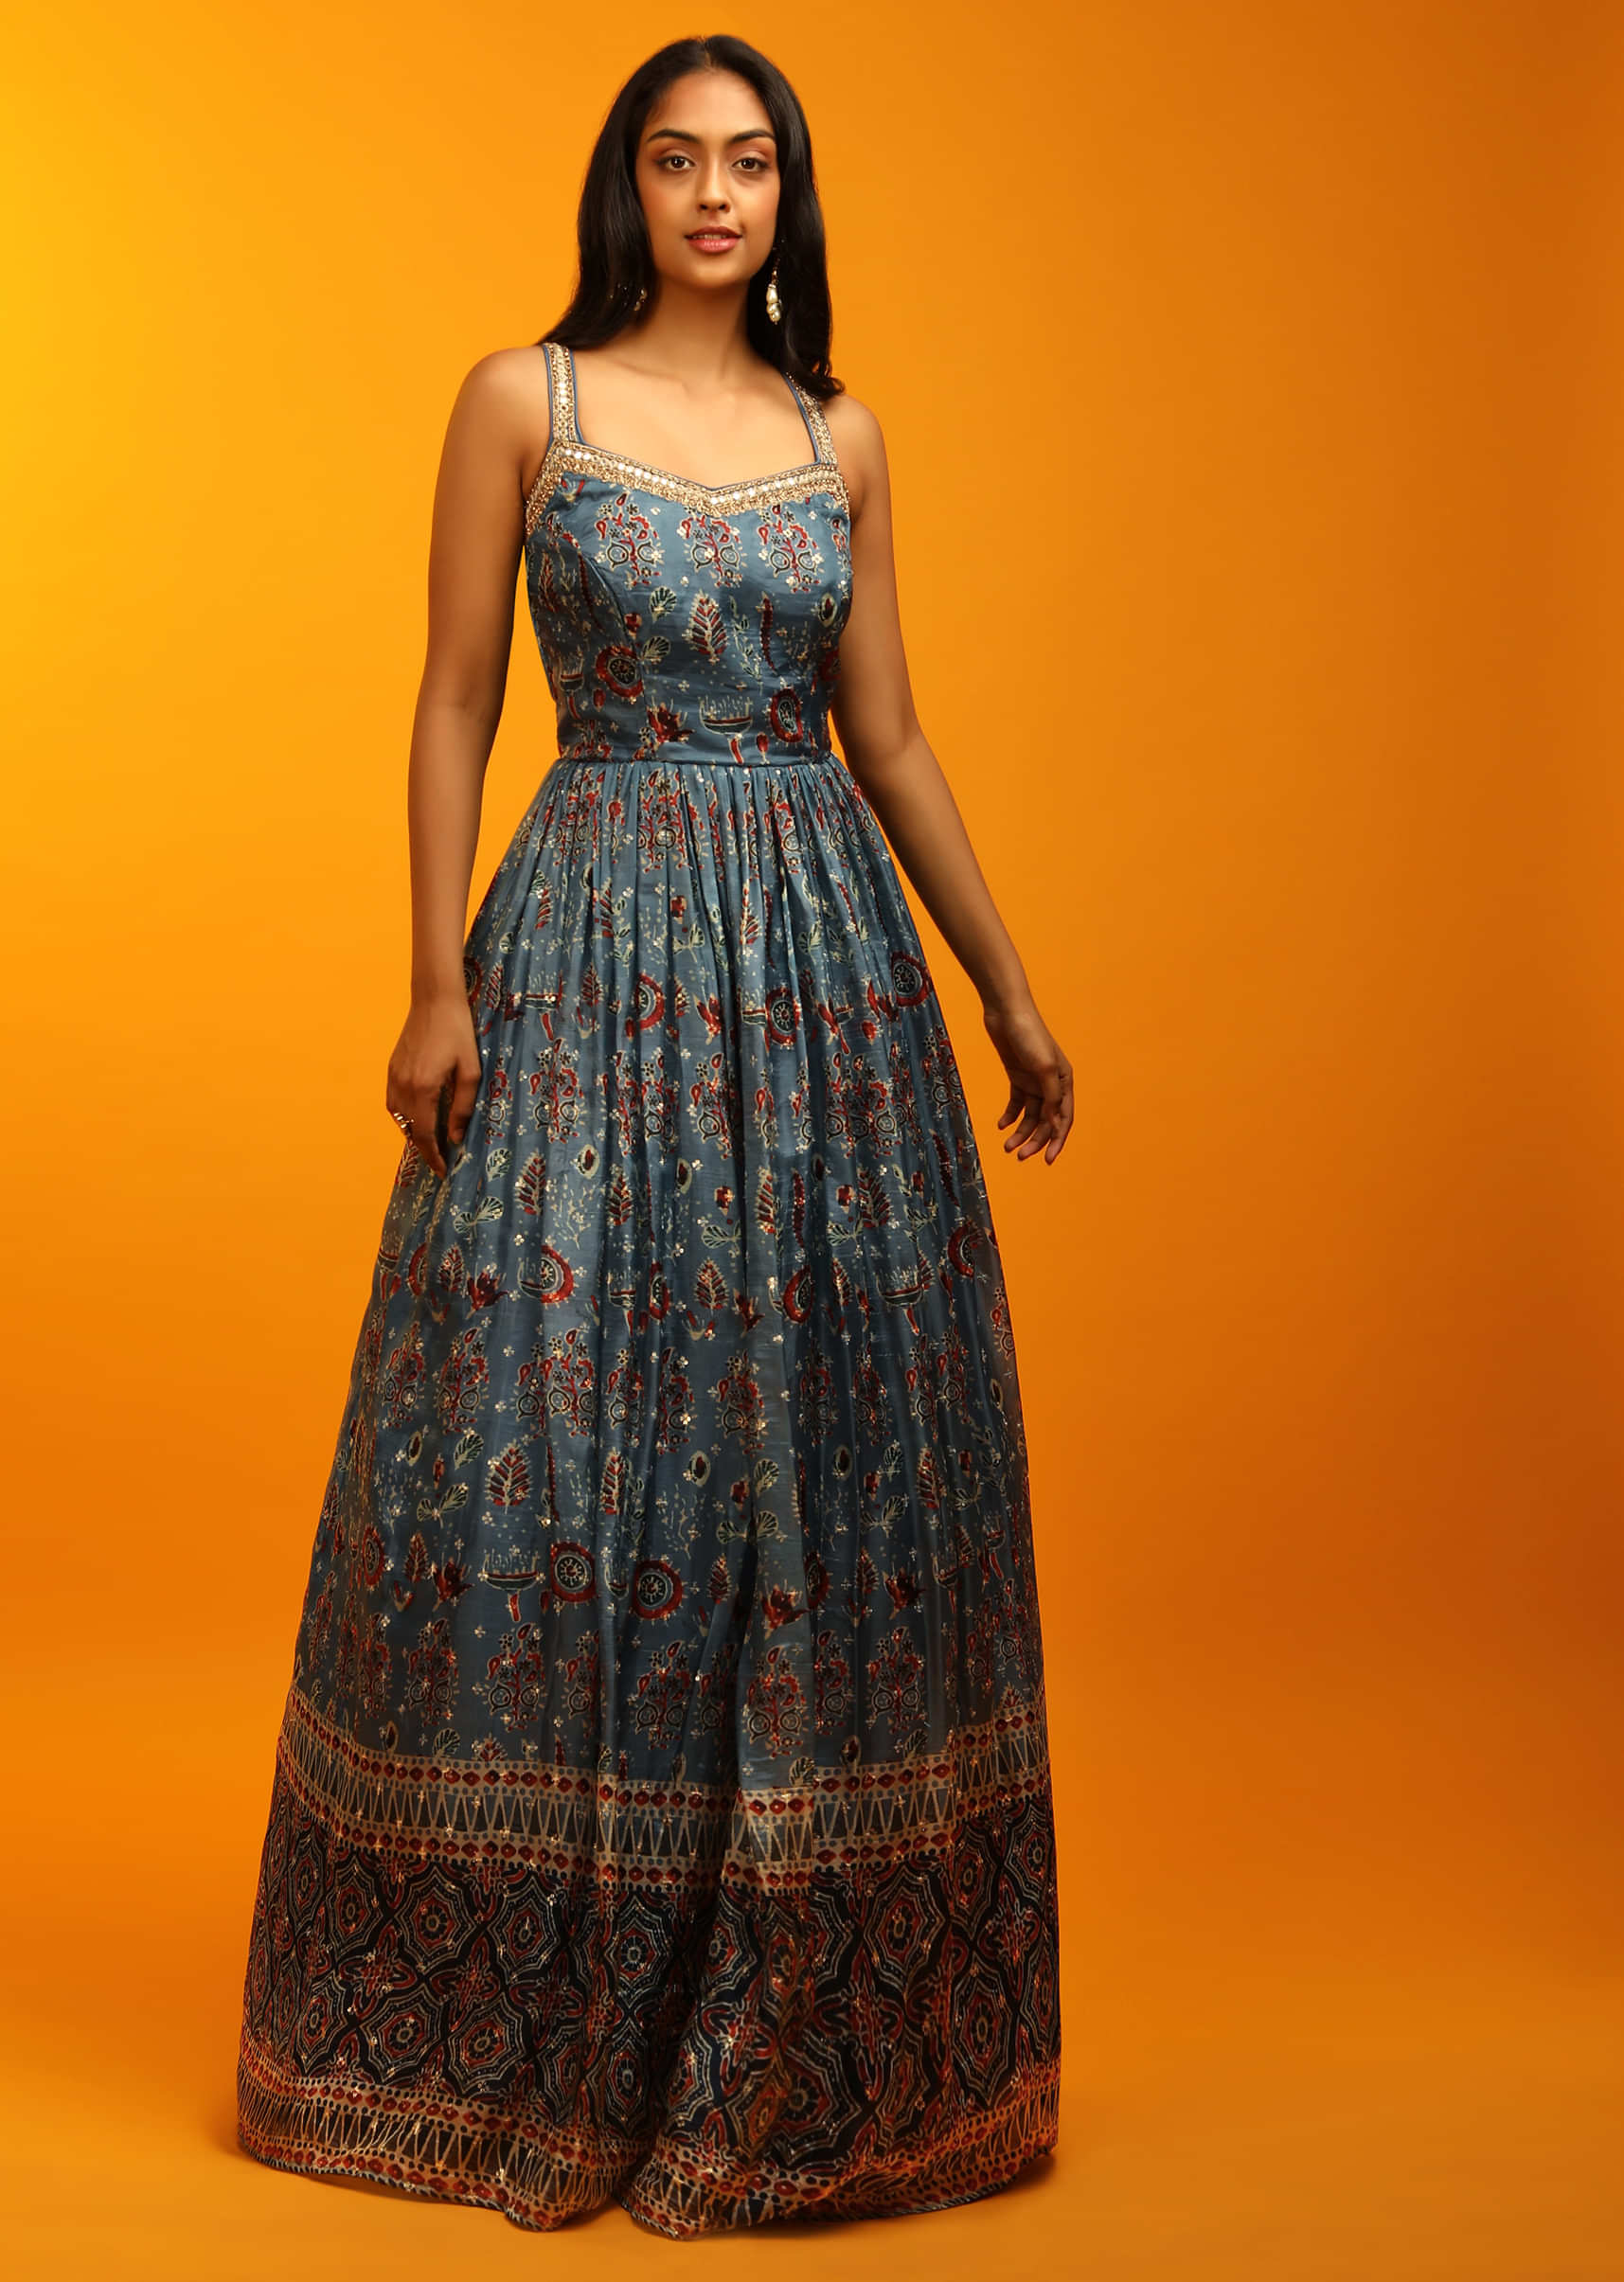 Stone Blue Anarkali Dress In Satin Crepe With Ethnic Batik Print And Mirror Embroidery  